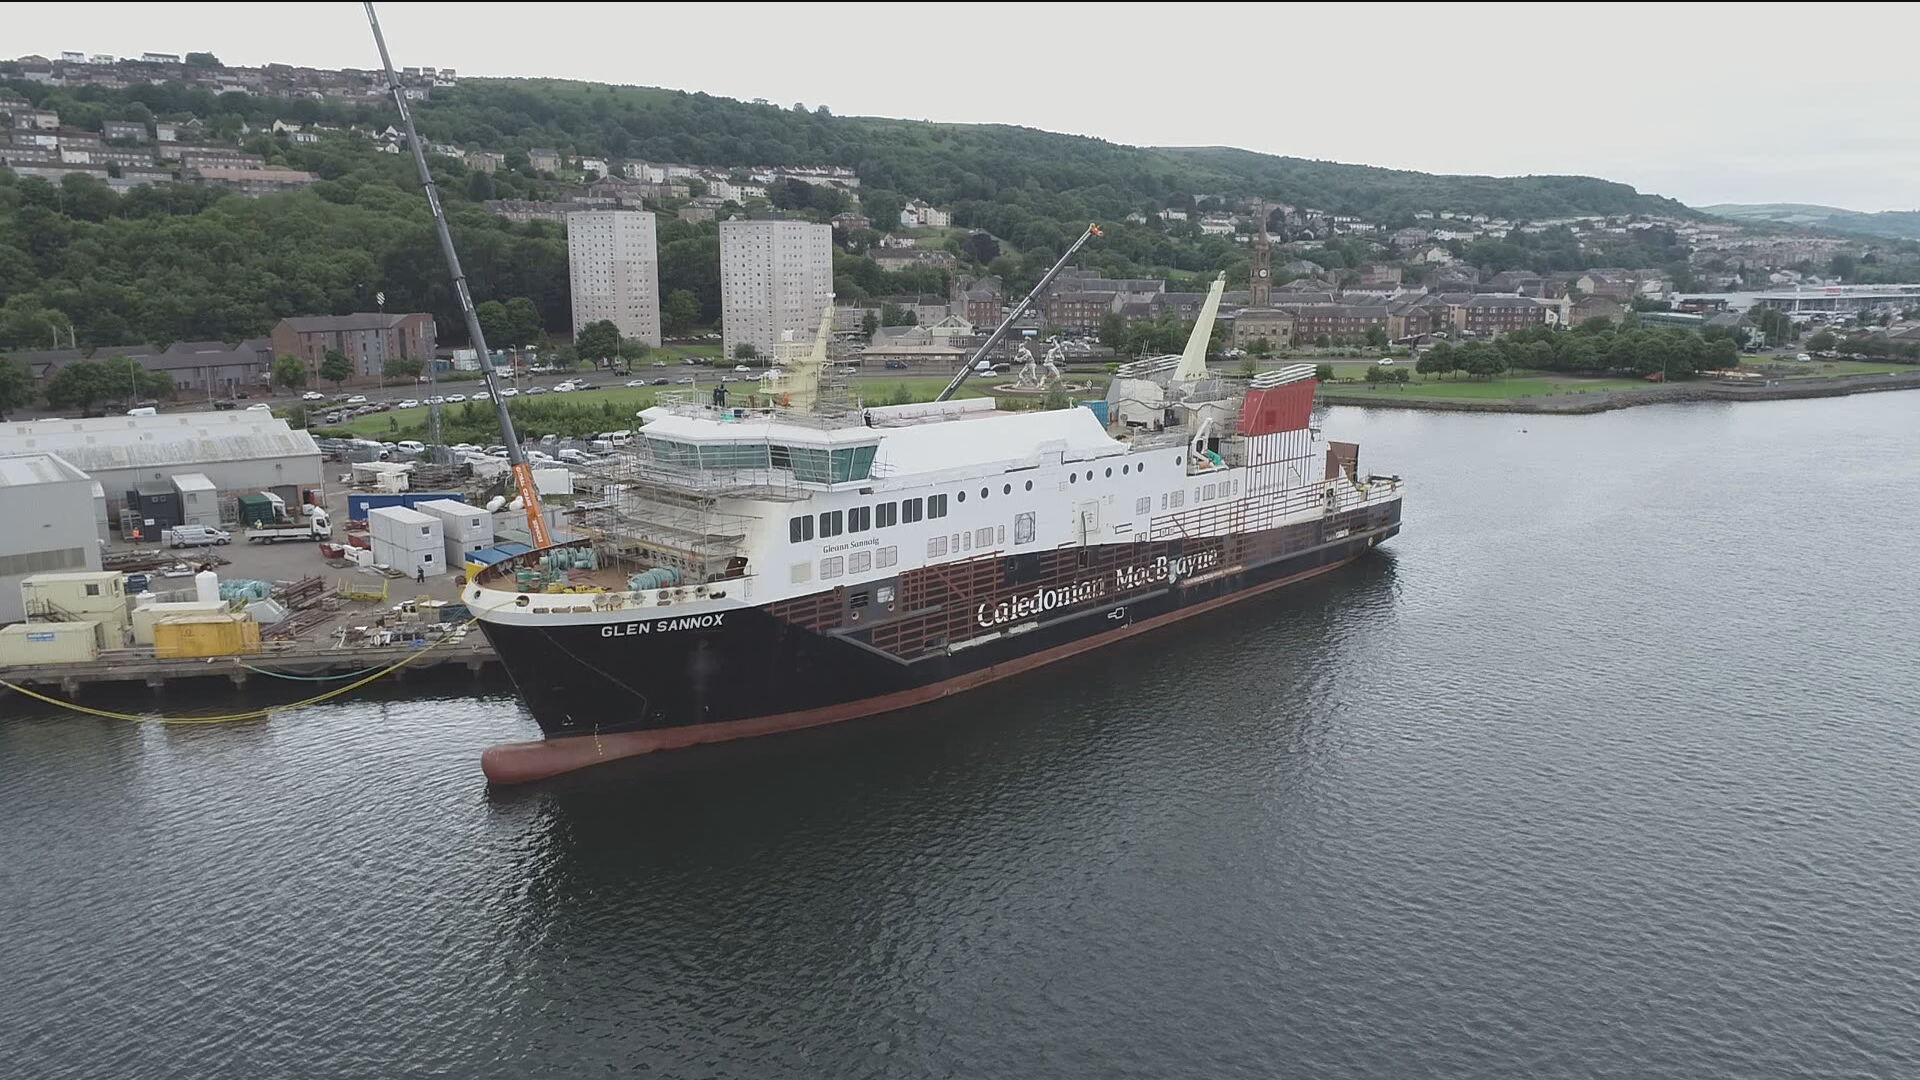 Two ferries being built at the Fergusons shipyard in Port Glasgow have been delayed again.